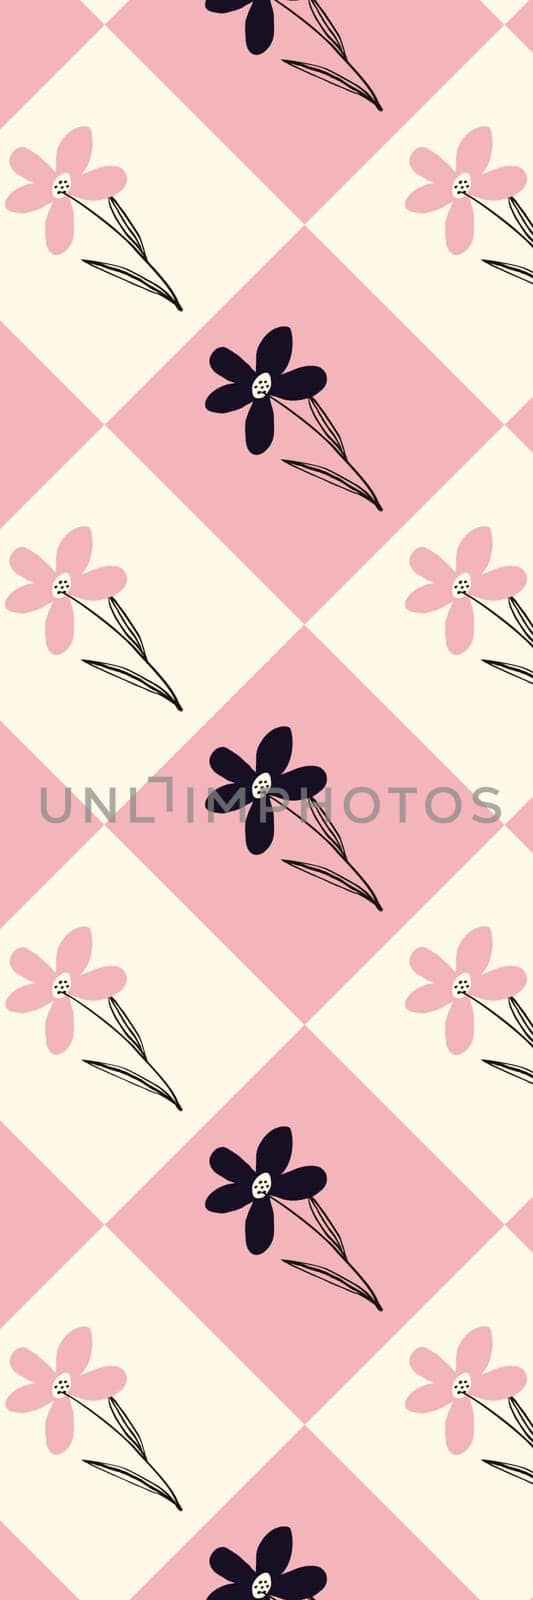 pink floral cute printable bookmark with spring flowers